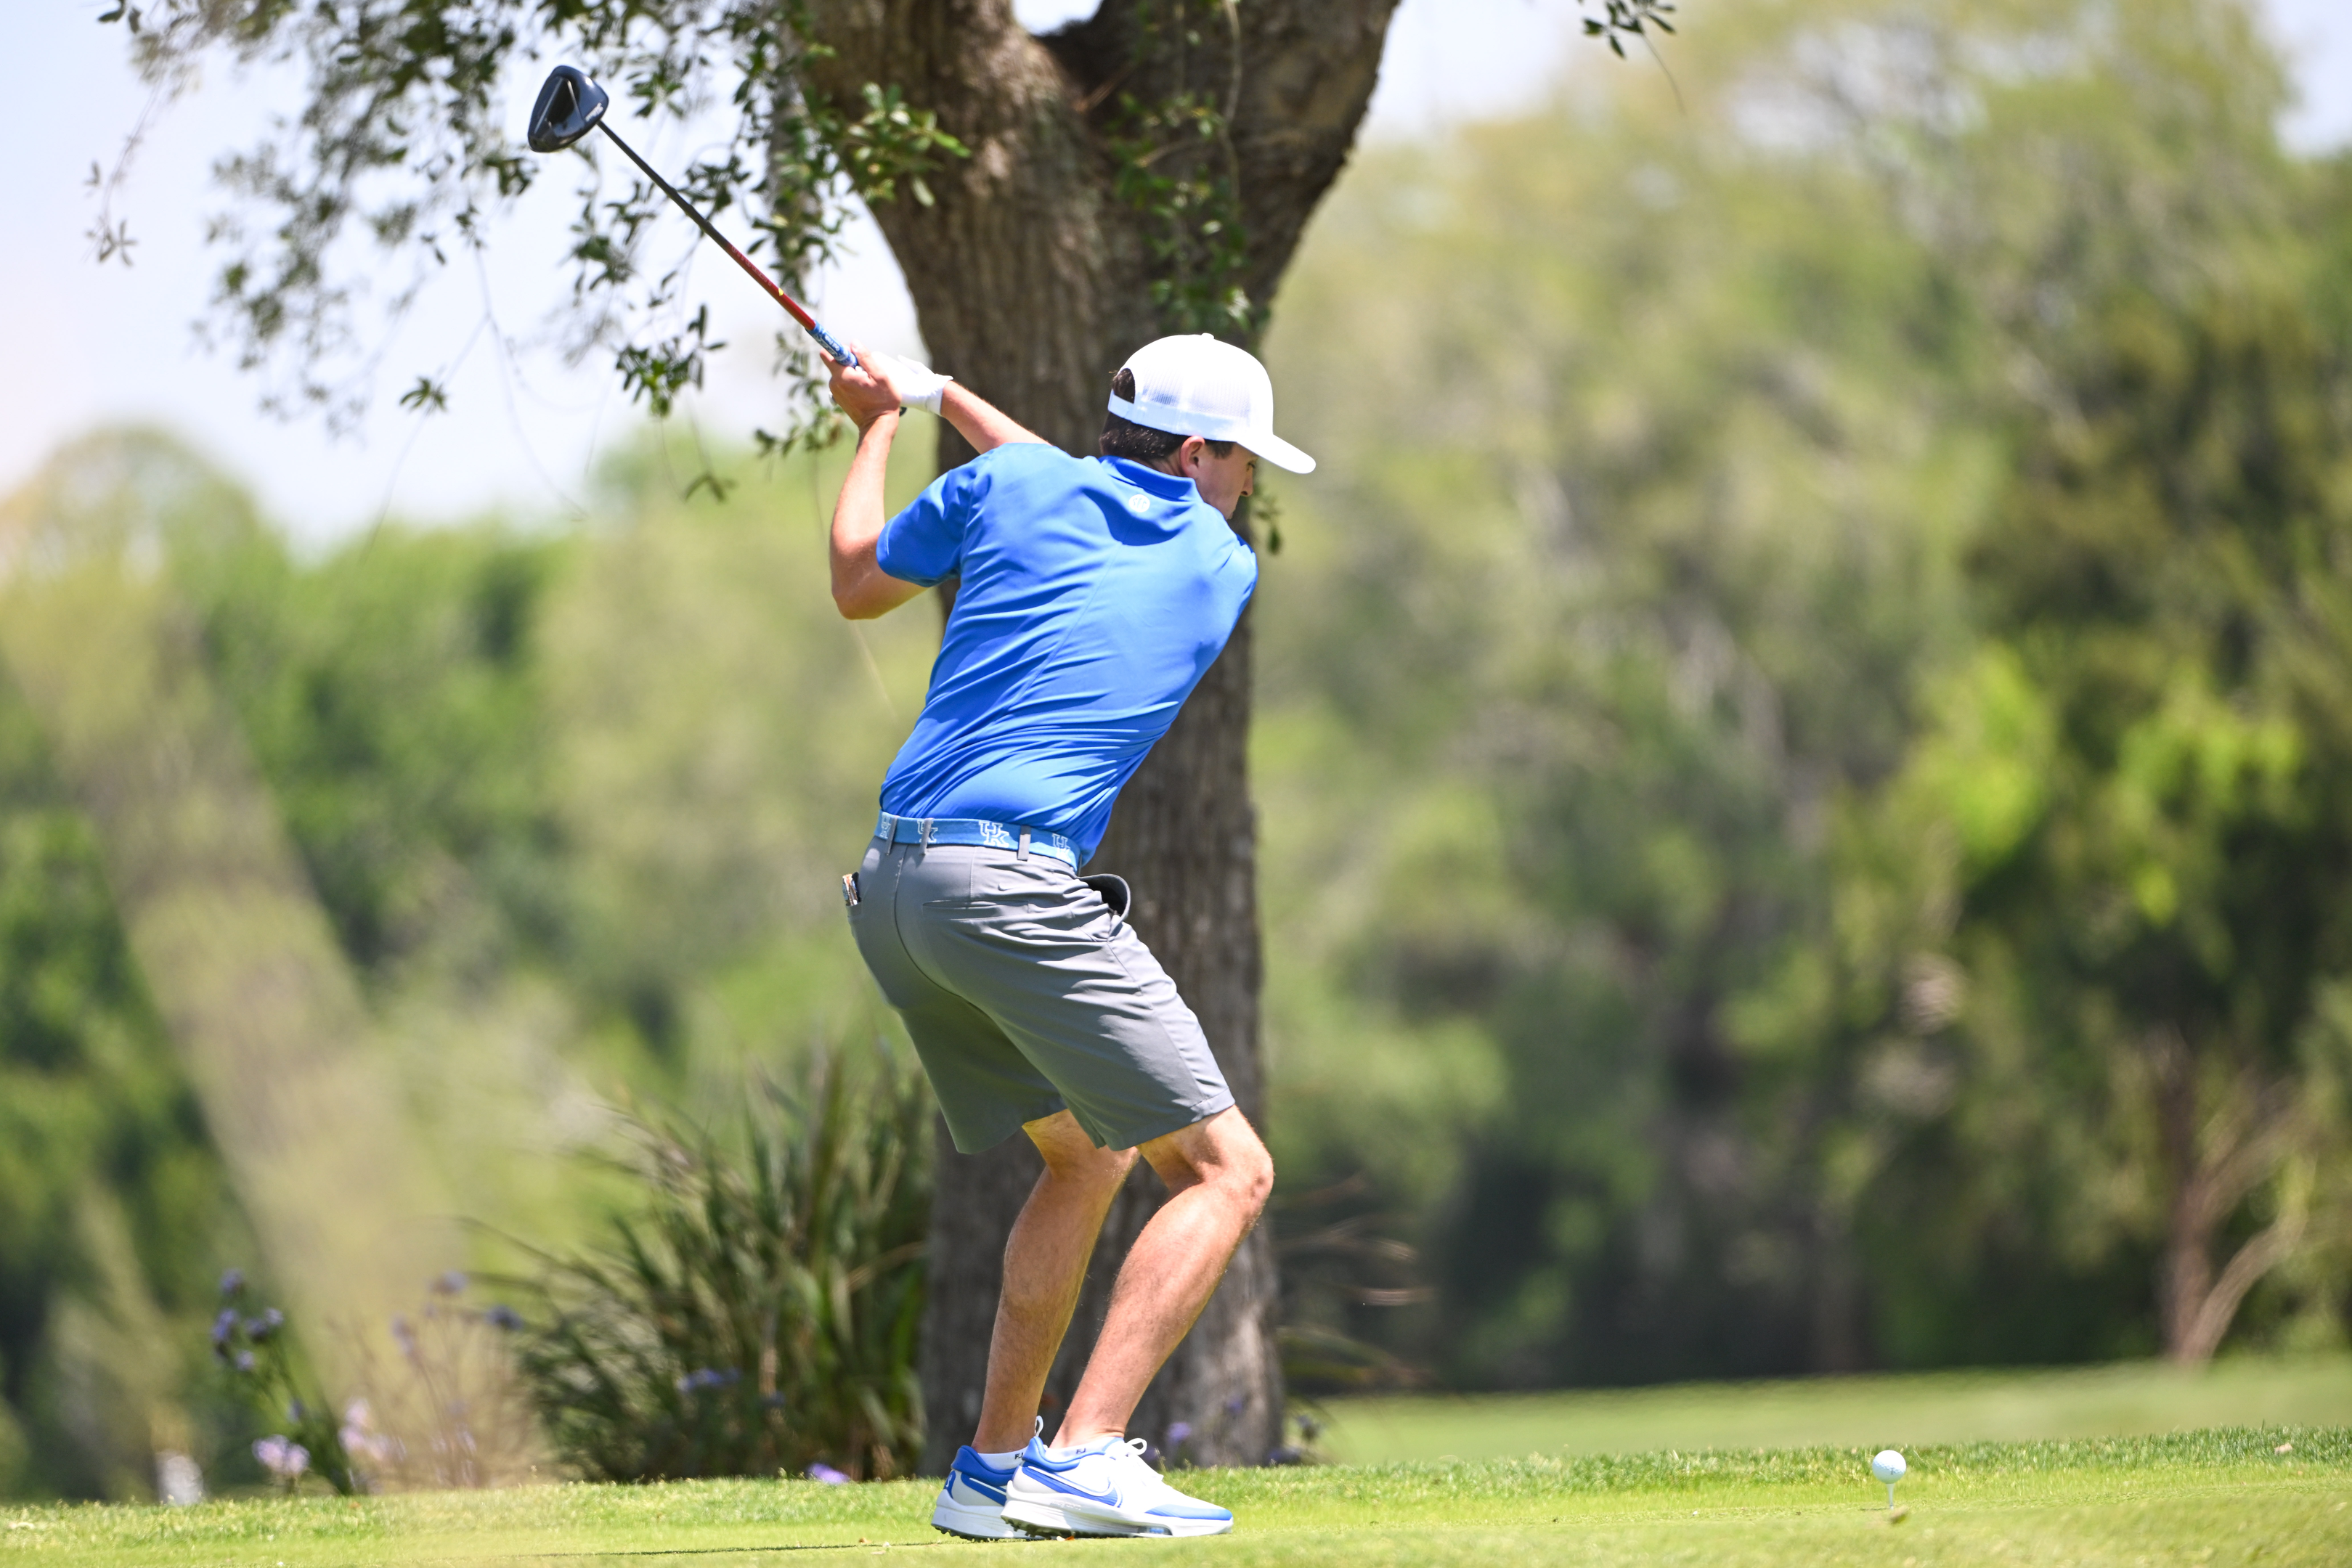 Alex Goff Becomes 11th All-American in Kentucky Men’s Golf History